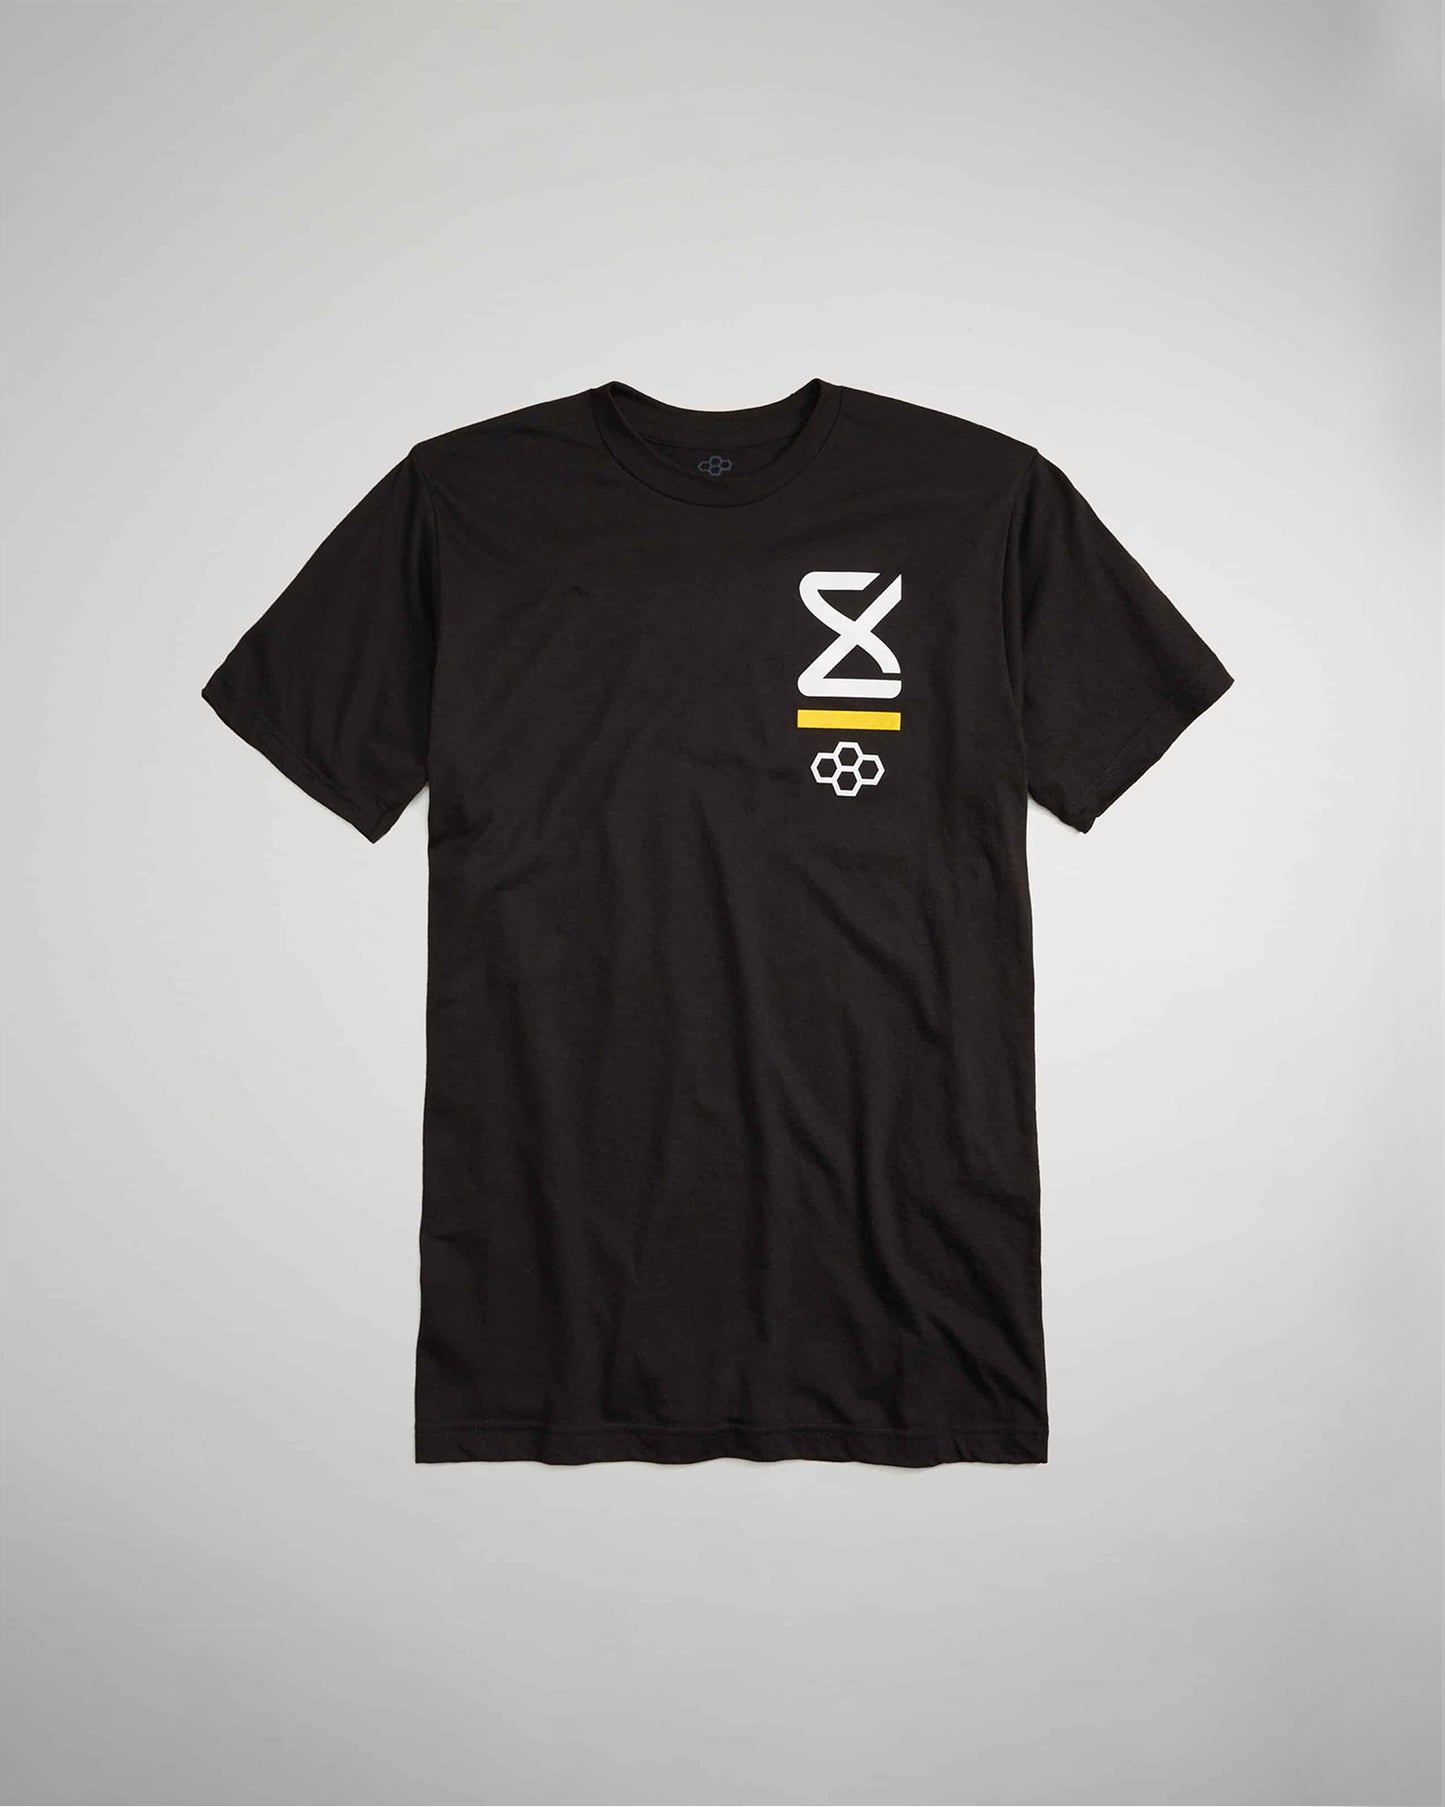 Spencer Lee No Excuses T-Shirt